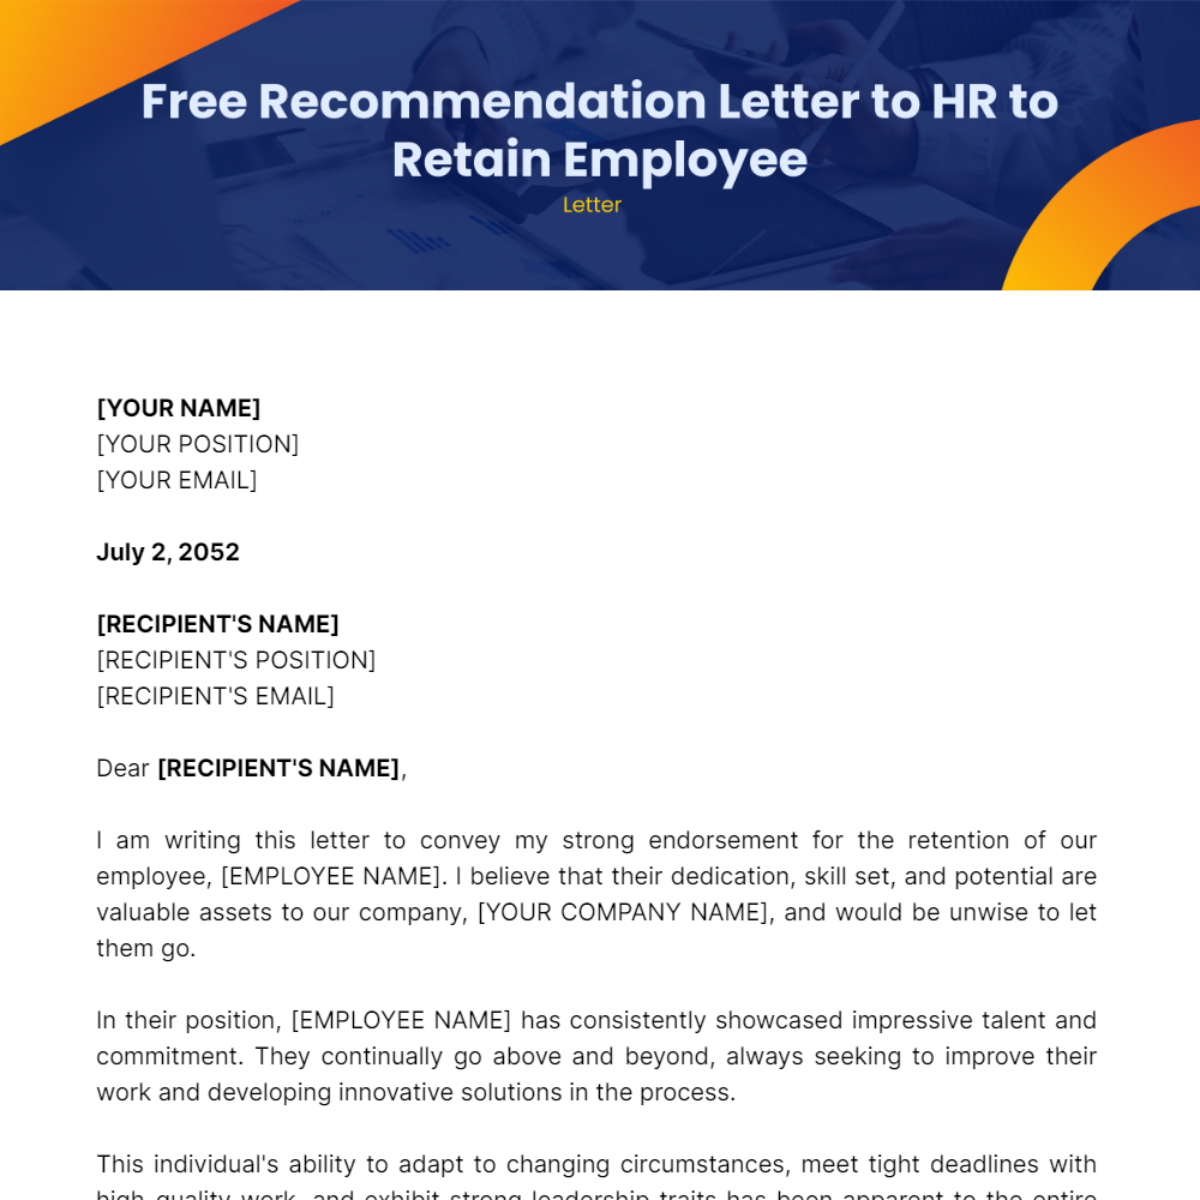 Recommendation Letter to HR to Retain Employee Template